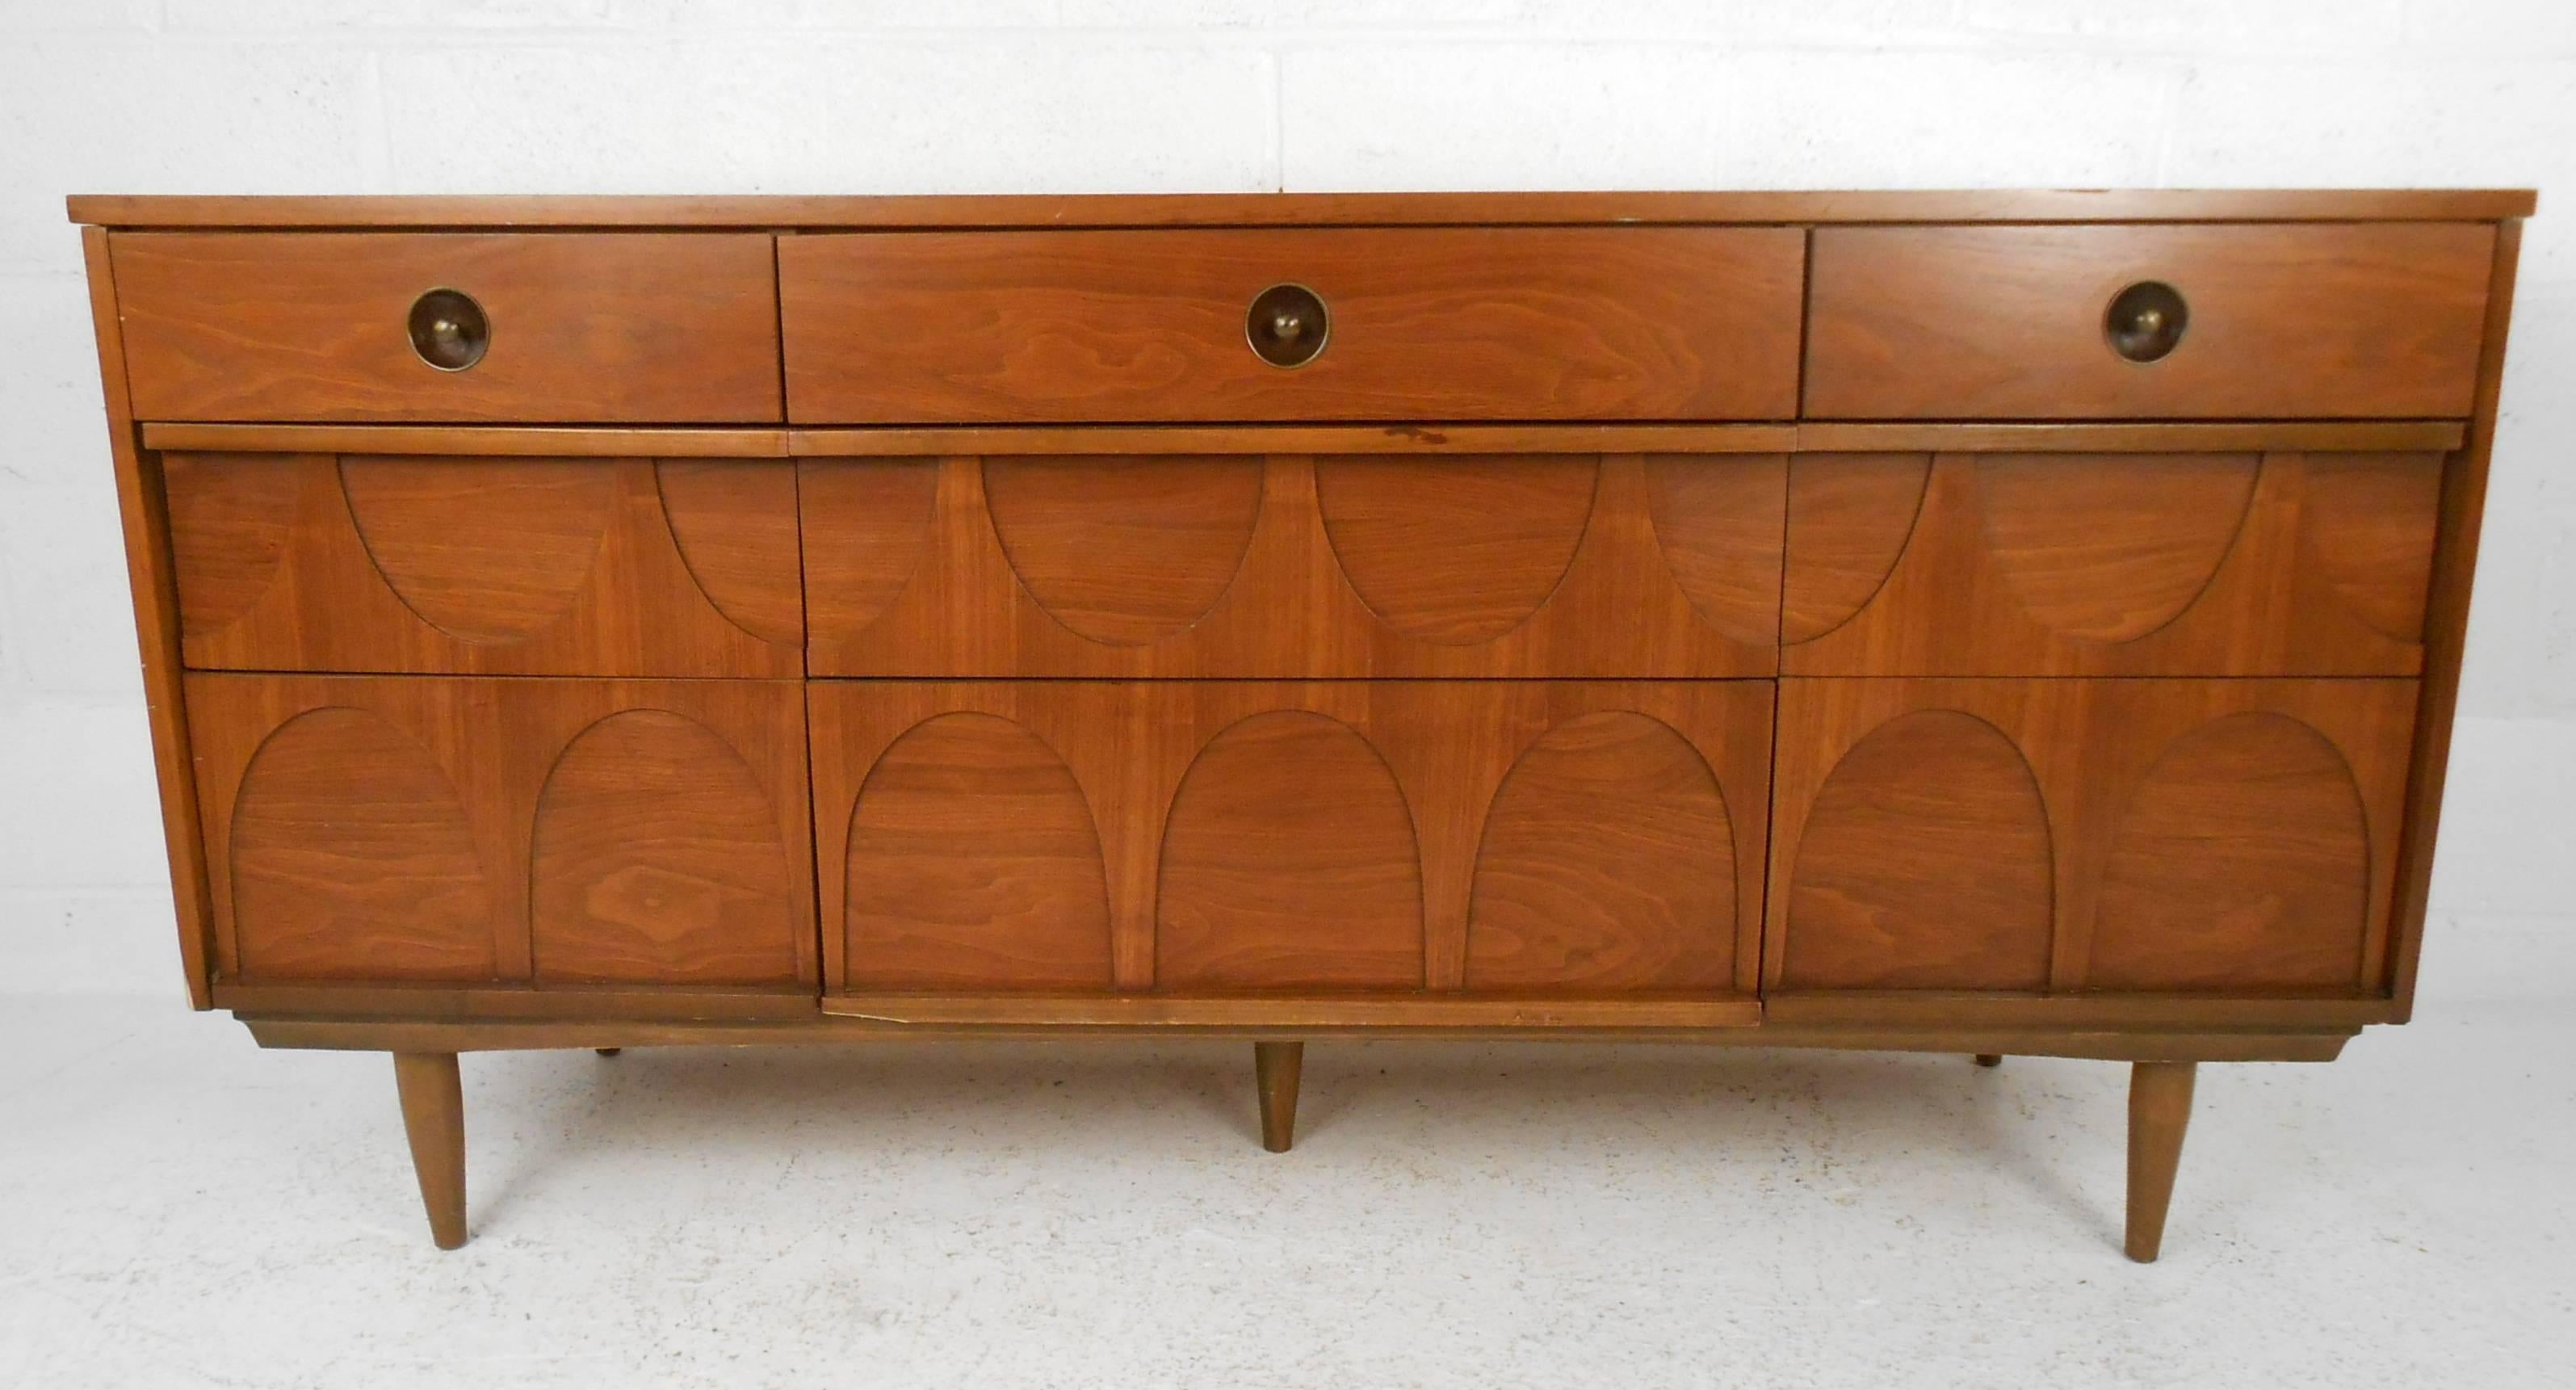 This beautiful vintage modern dresser features nine large drawers and a sculpted front. Unique circular recessed drawer pulls, elegant walnut wood grain, and tapered legs add to the allure. Quality craftsmanship with a centre leg for added